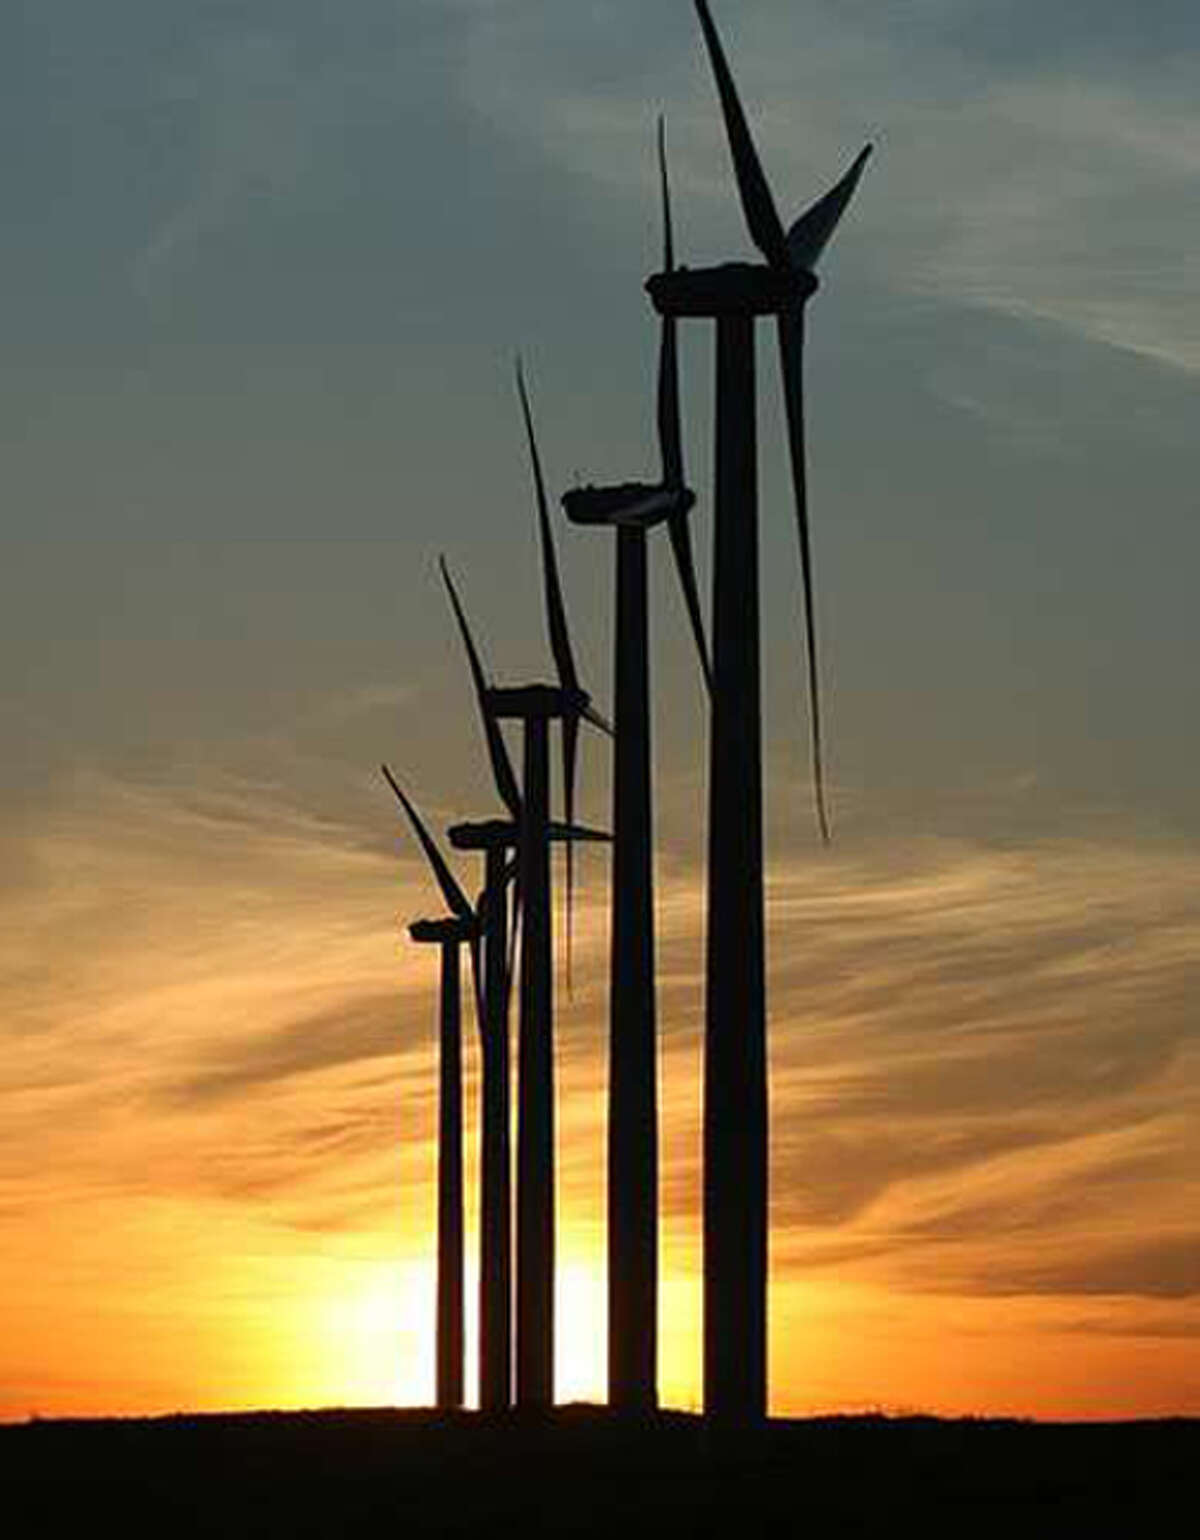 Wind turbines, similar to those shown in this photo, are expected to change the Hale County landscape as plans are to have 850-900 turbines in the county within five years. Each turbine will cost about $2 million. Early phase construction is expected to begin late this year.